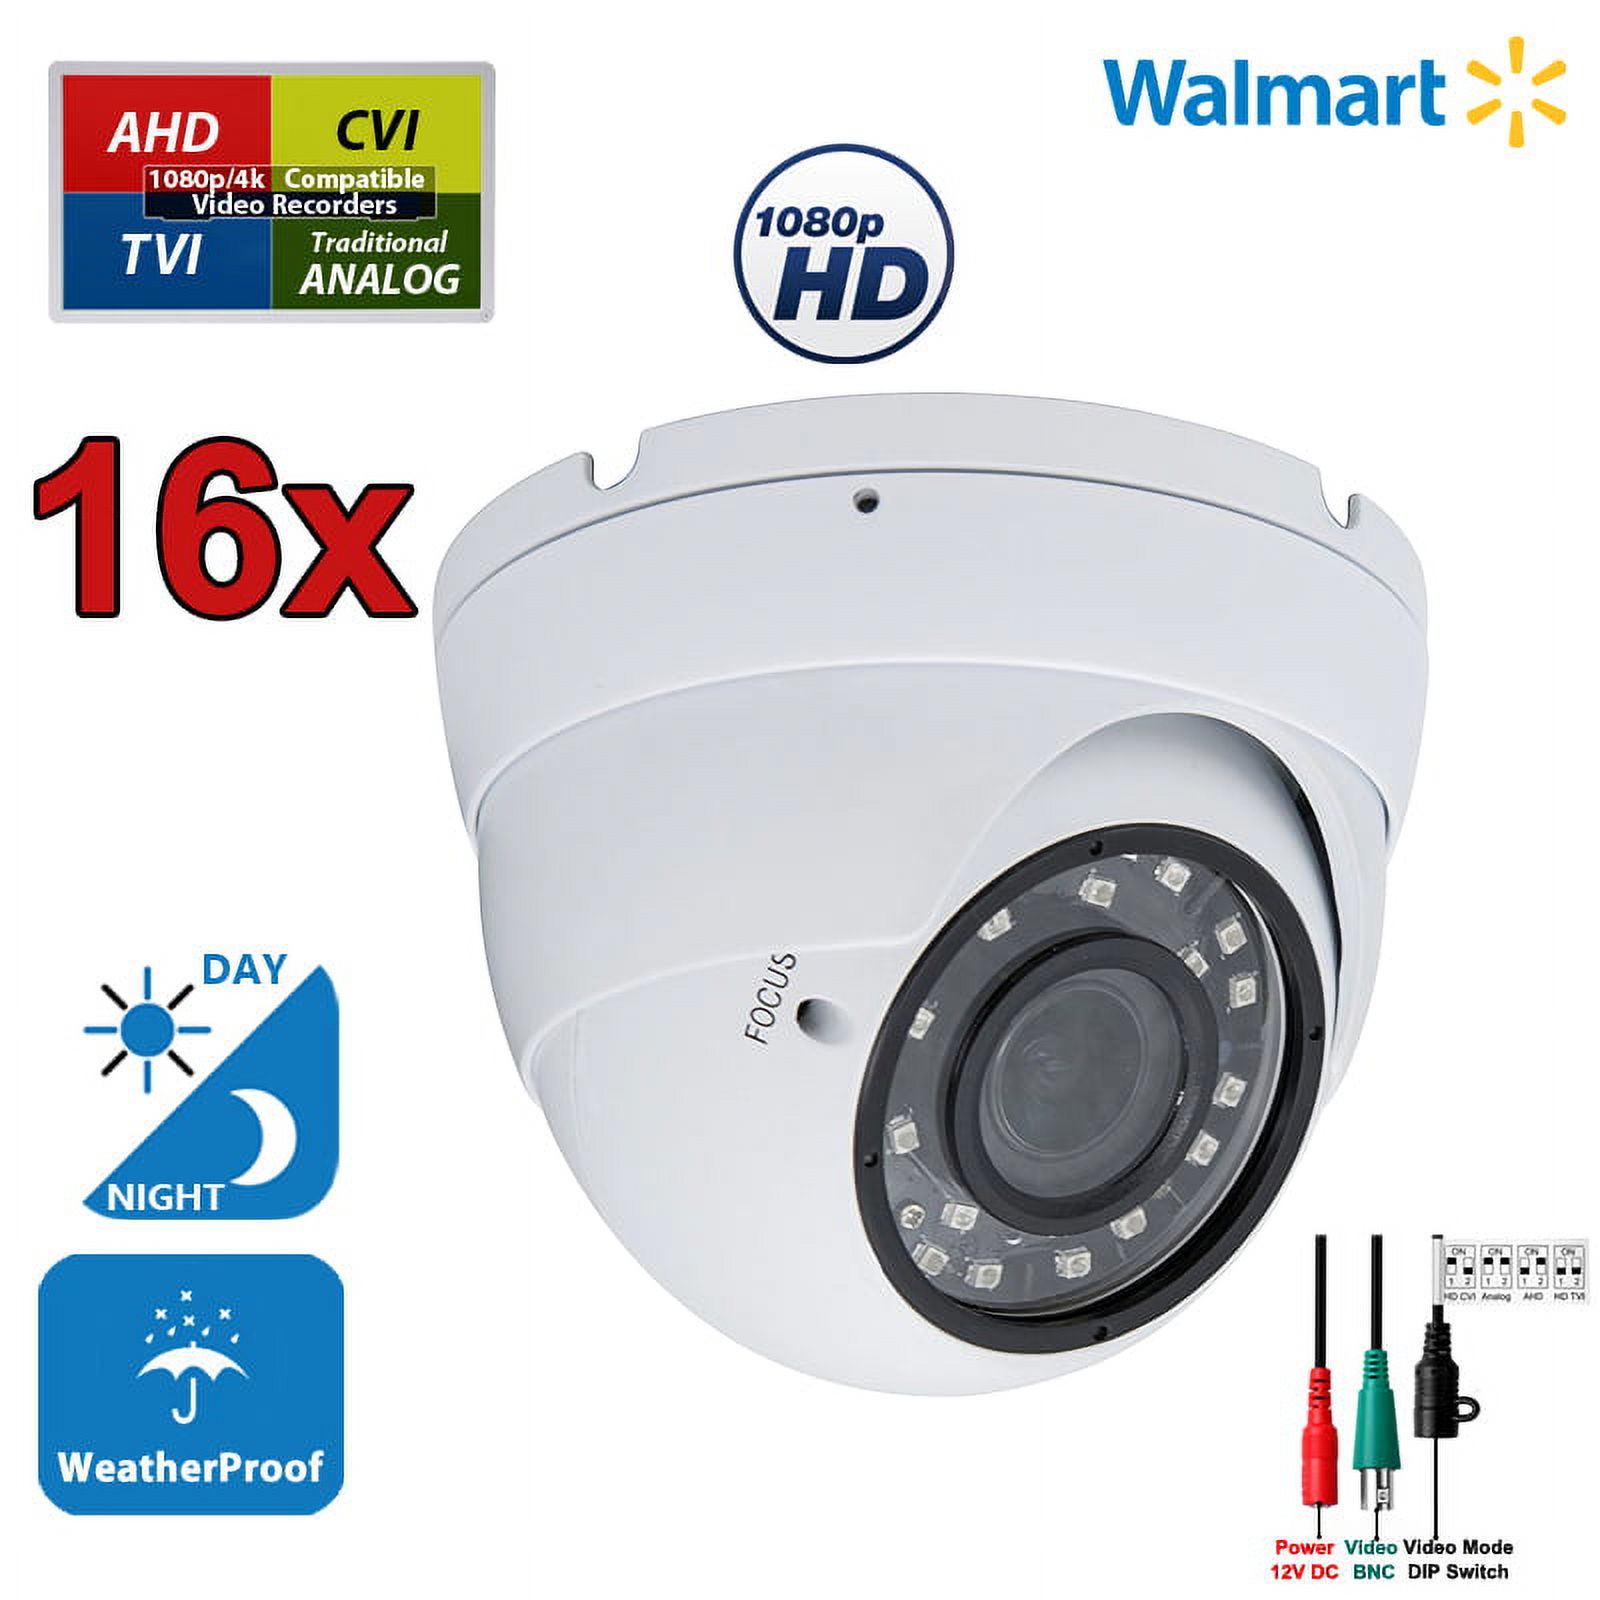 Evertech 1080P High Resolution Indoor Outdoor Security Surveillance Camera Adjustable Vari-Focal Lens 4in1 AHD TVI CVI and Analog Camera - Pack of 16 - image 2 of 6